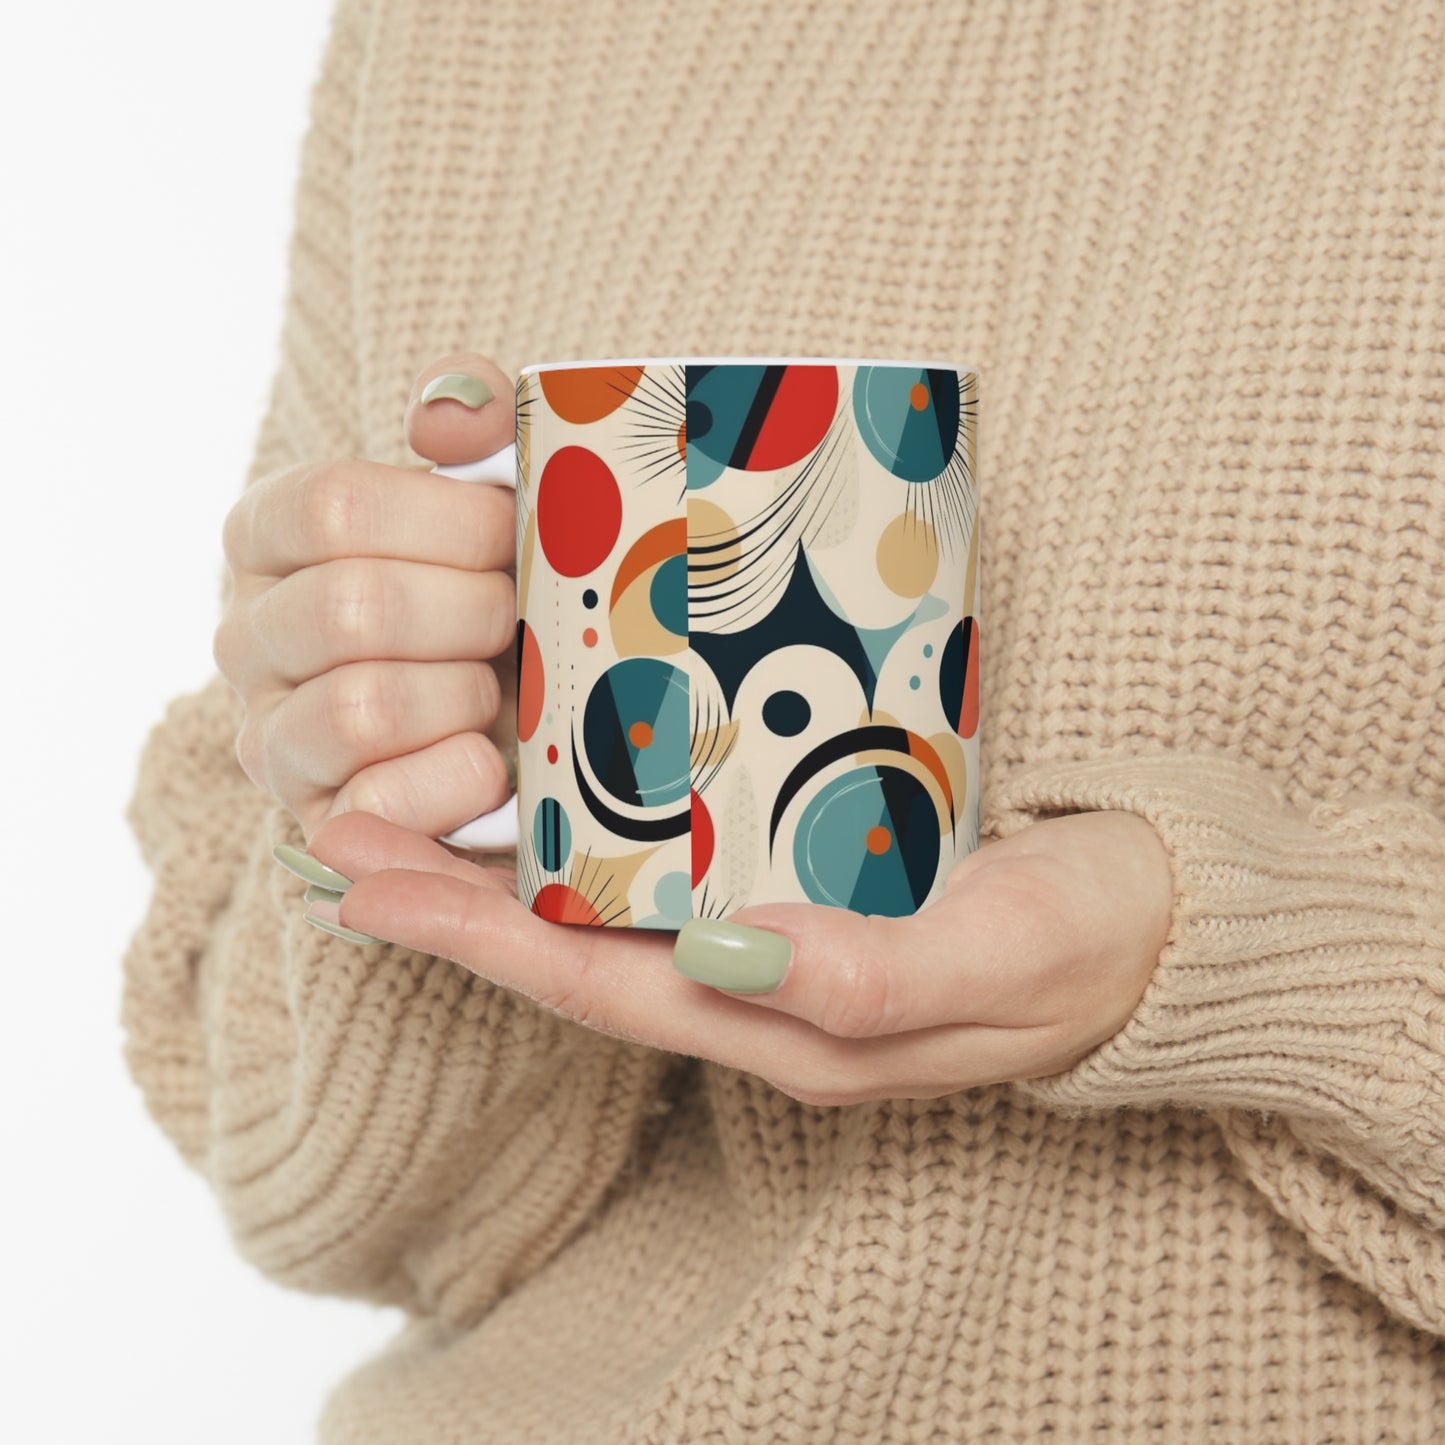 Midcentury Modern Delight: Ceramic Mug with Abstract Art and Atomic Age Design